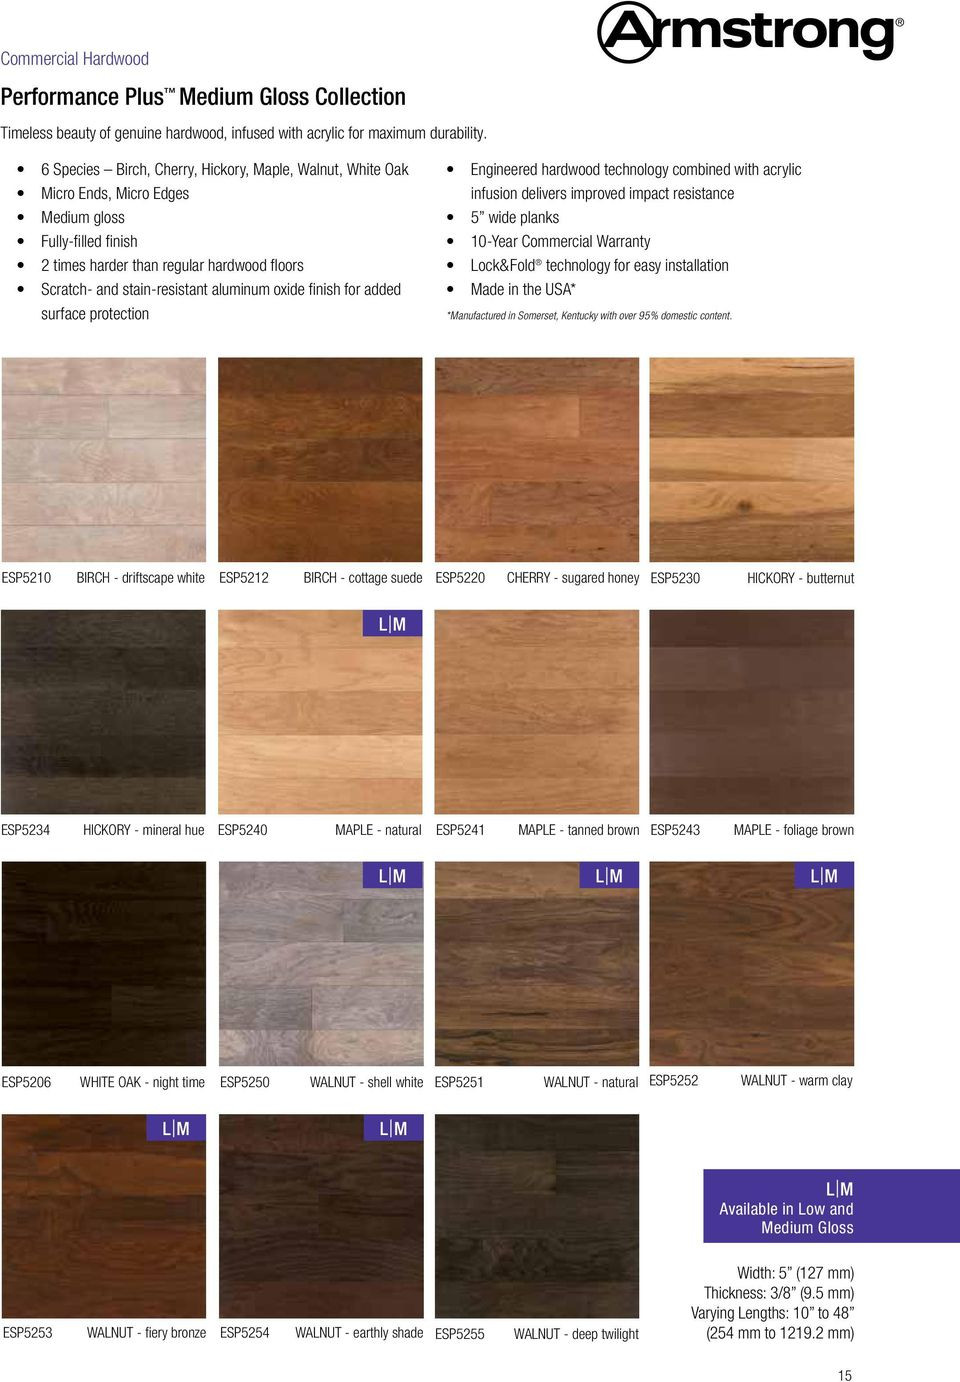 21 Famous Engineered Hardwood Flooring Manufacturers Canada 2024 free download engineered hardwood flooring manufacturers canada of performance plus midtown pdf intended for oxide finish for added surface protection engineered hardwood technology combined with acrylic 